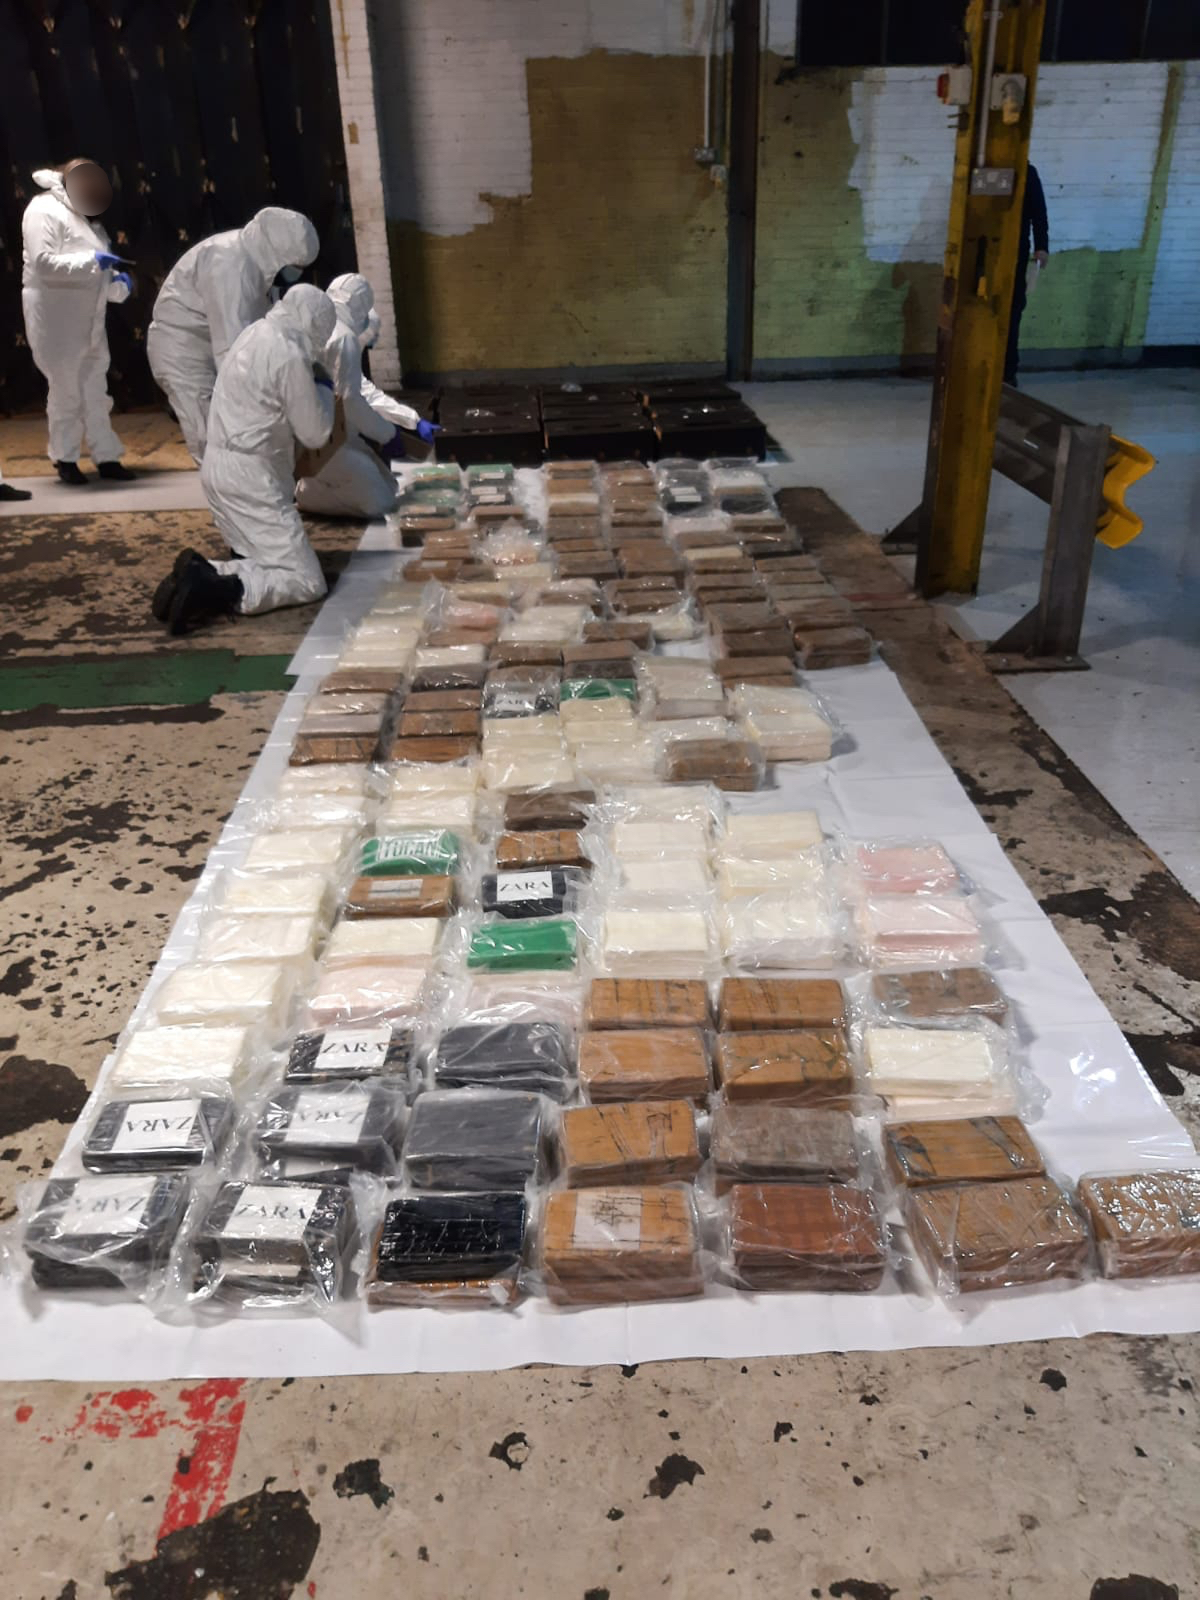 Investigators working at the site after the raid that led to seven arrests and the seizure of 1.2 tonnes of cocaine in the early hours of Monday